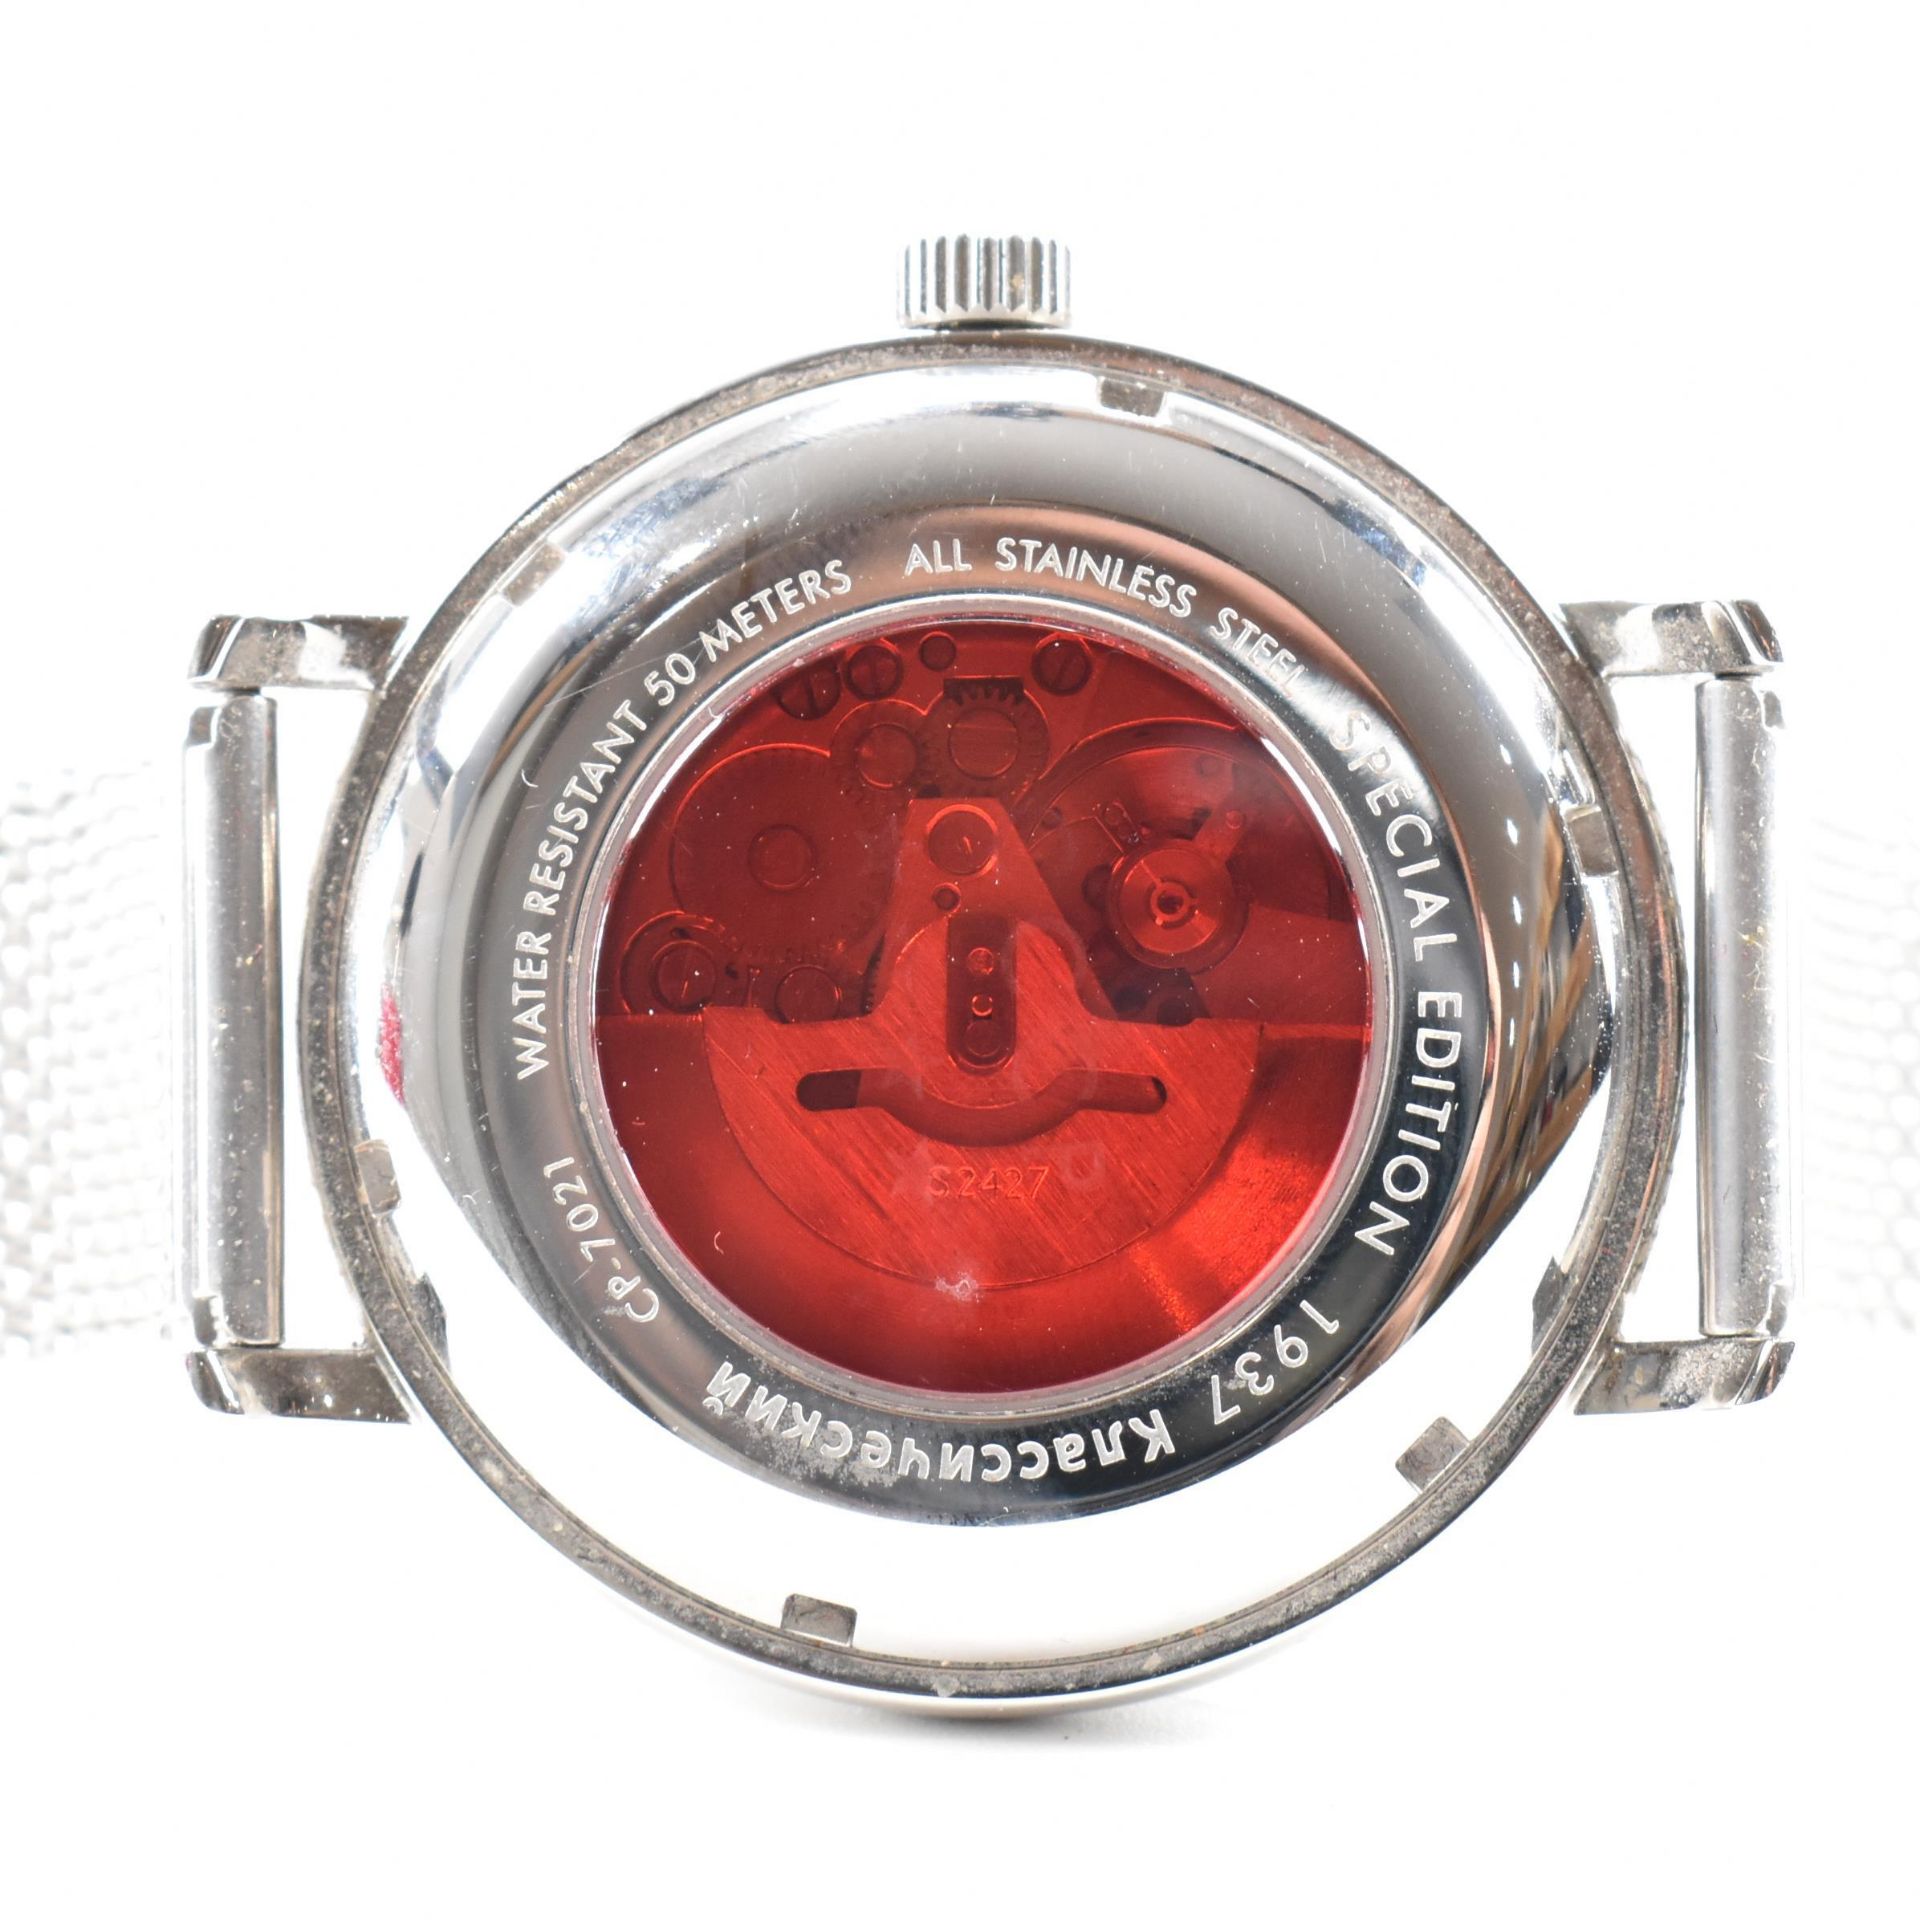 CCCP AUTOMATIC SPECIAL EDITION WATCH - Image 4 of 4